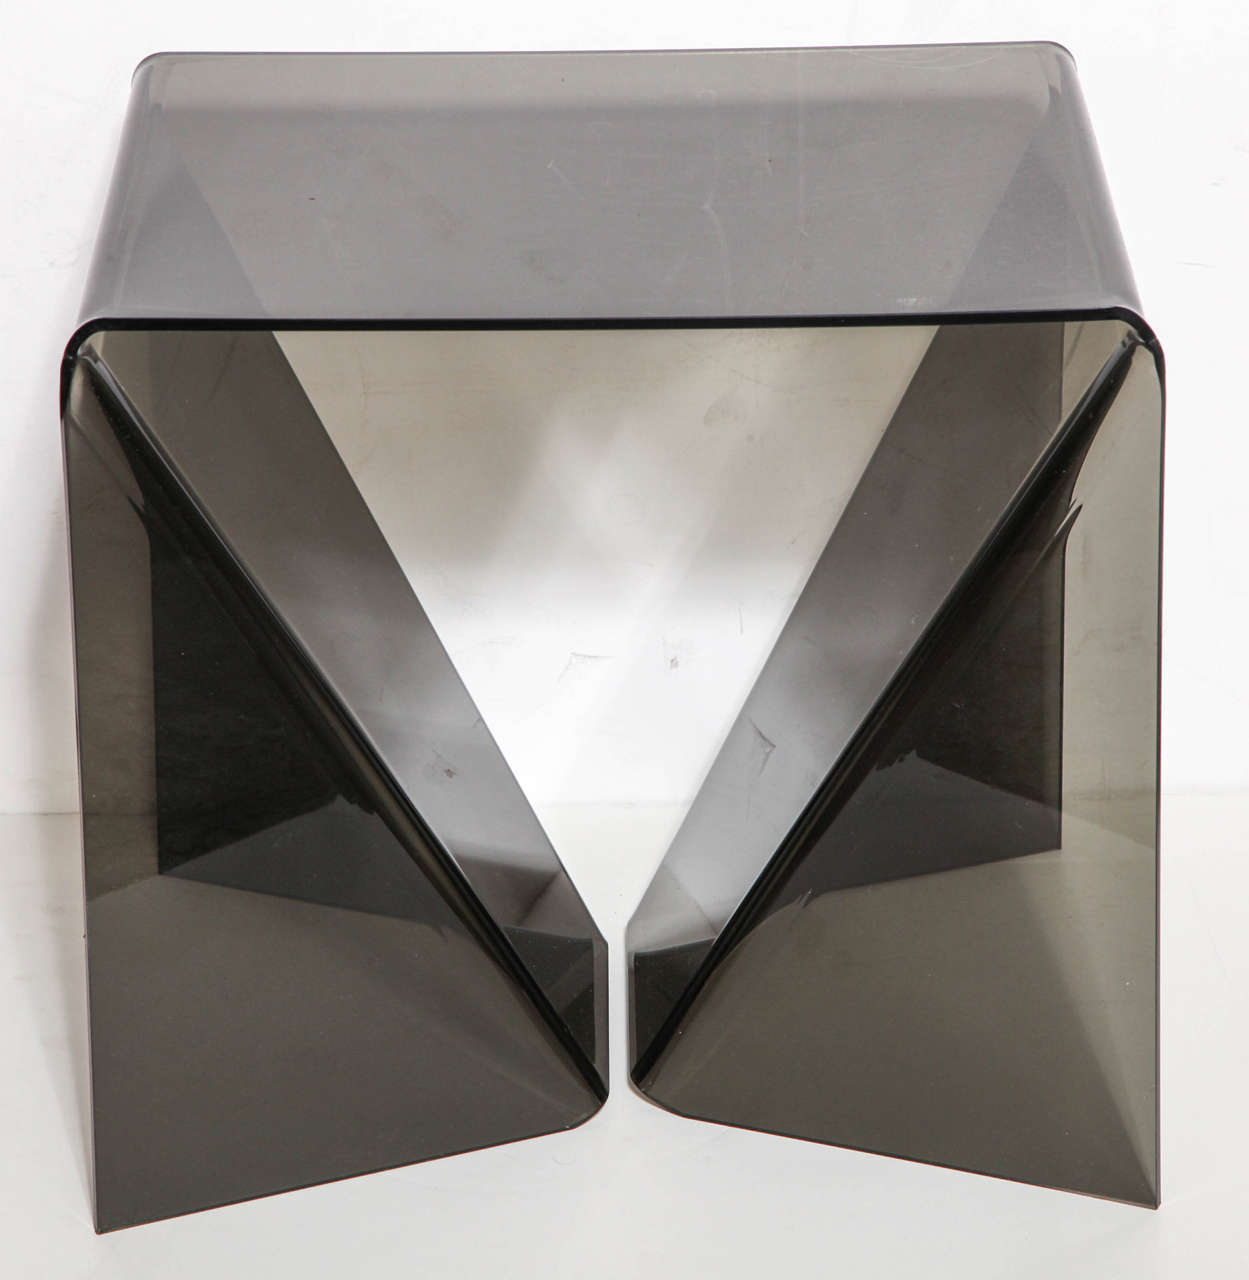 Pair of Op Art to Pop Art Neal Small Smoked Brown, Gray Smoke Perspex 'Origami' End Tables. Side by Side Coffee Tables. Classic. Versatile. Lightweight. Lucite. New old stock.